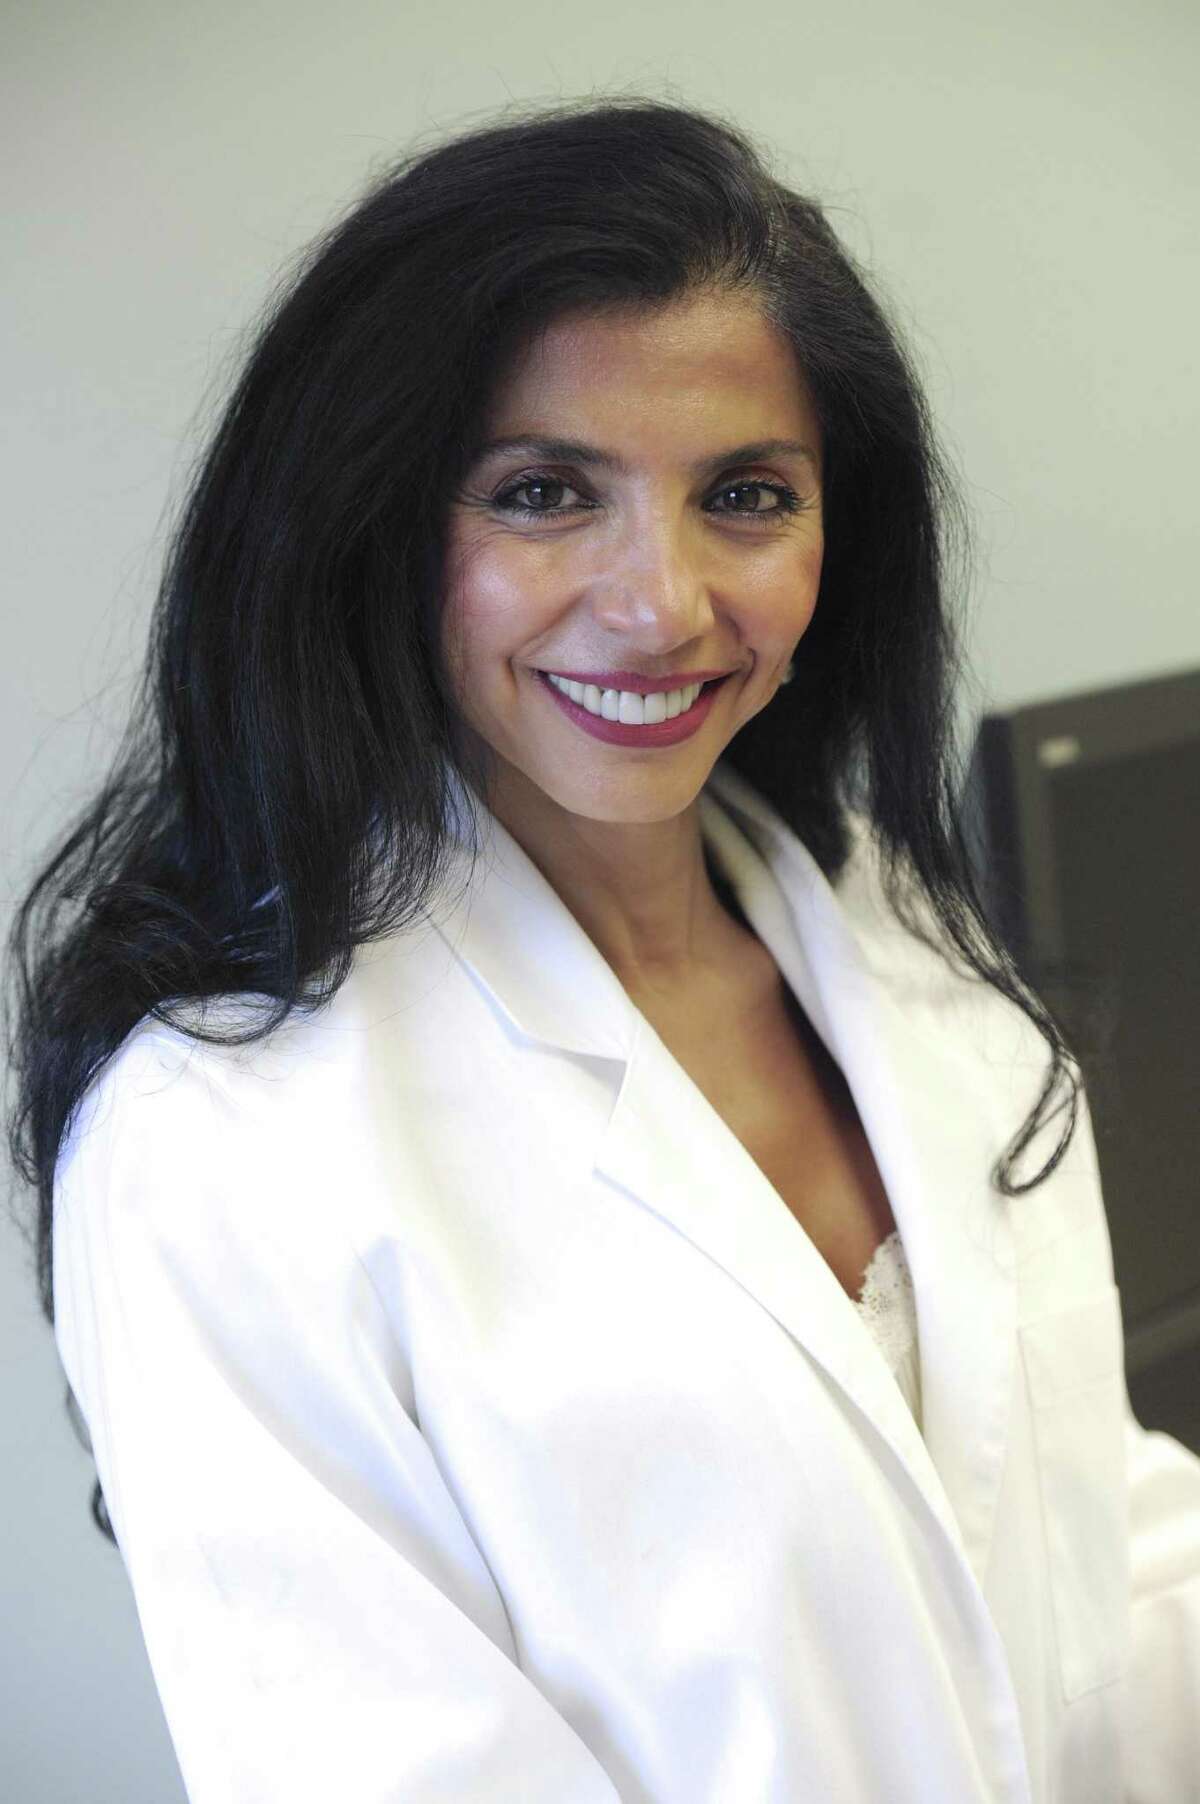 Dentist Leila Chahine, of Dental Wellness and Health in Danbury, recently received accreditation from AADSM (American Academy of Dental Sleep Medicine) for sleep related breathing disorders. Tuesday, August 15, 2017, in Danbury, Conn.